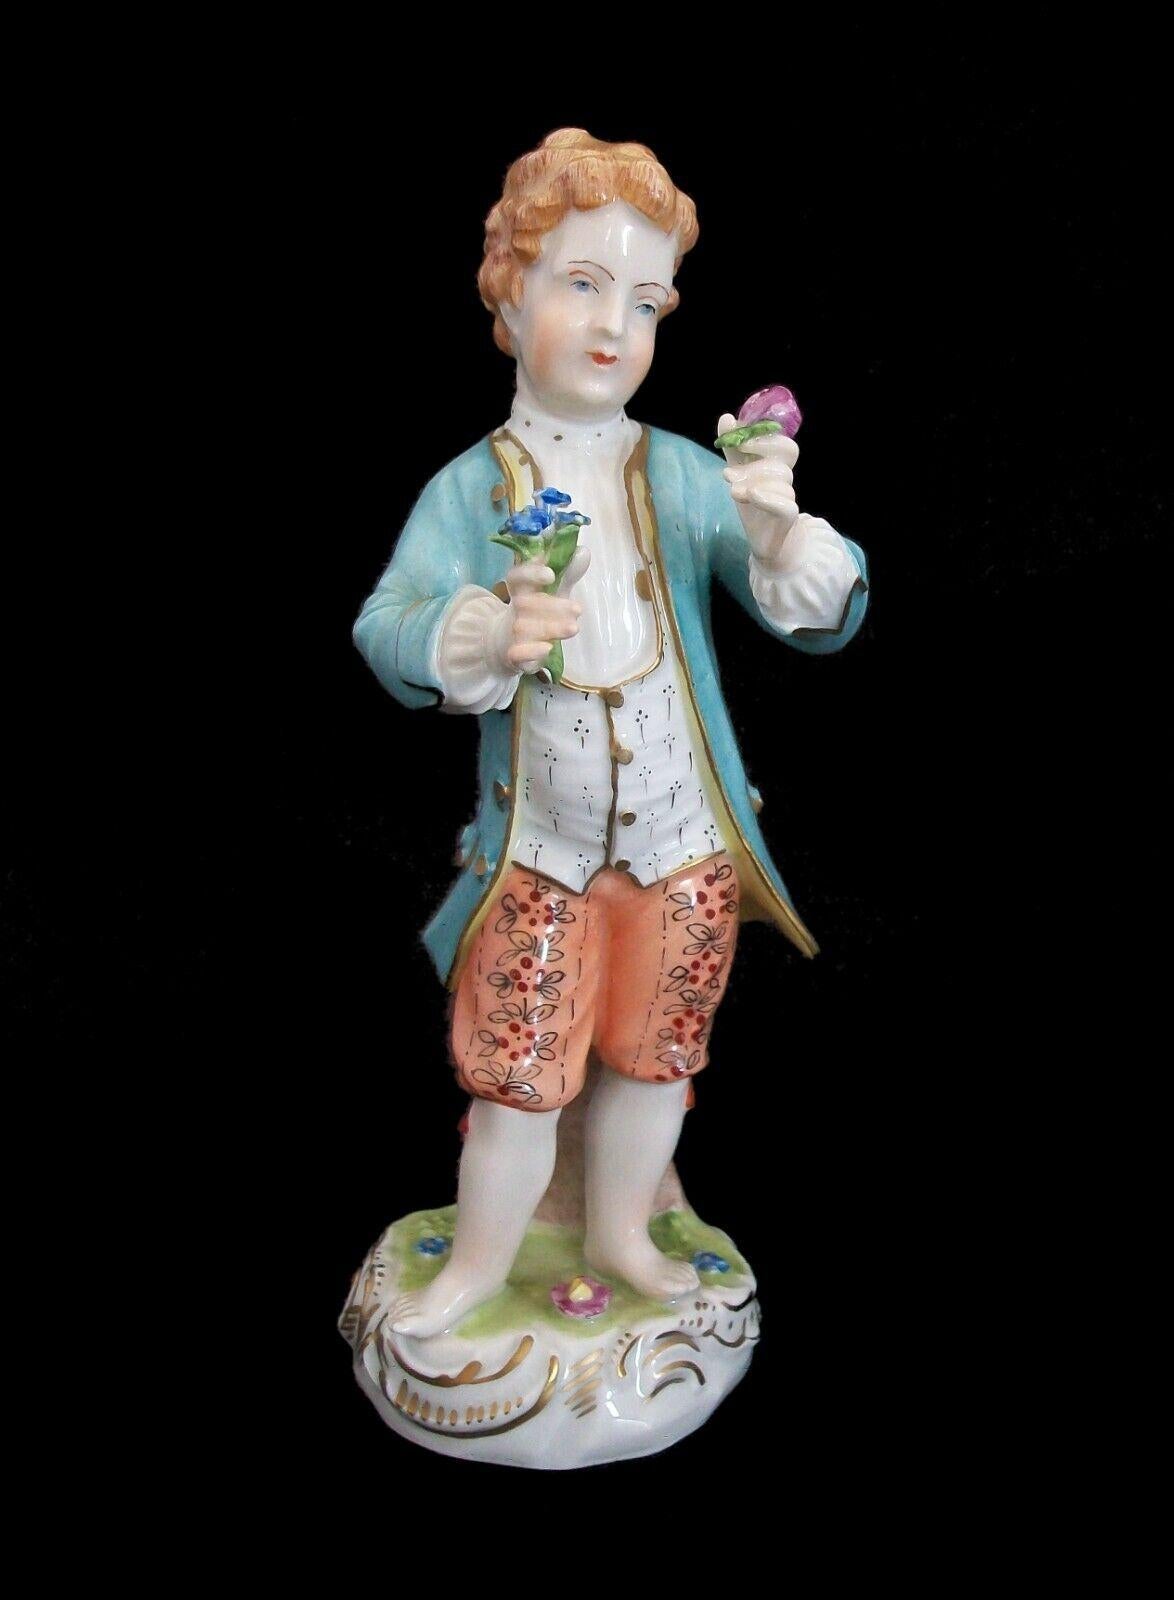 CARL THIEME (Factory / Manufacturer) - Potschappel (Village / Location) - Antique Dresden hand painted, decorated and gilded porcelain figure of a courting gentleman in 18th century style clothing - signed in underglaze blue on the base - impressed